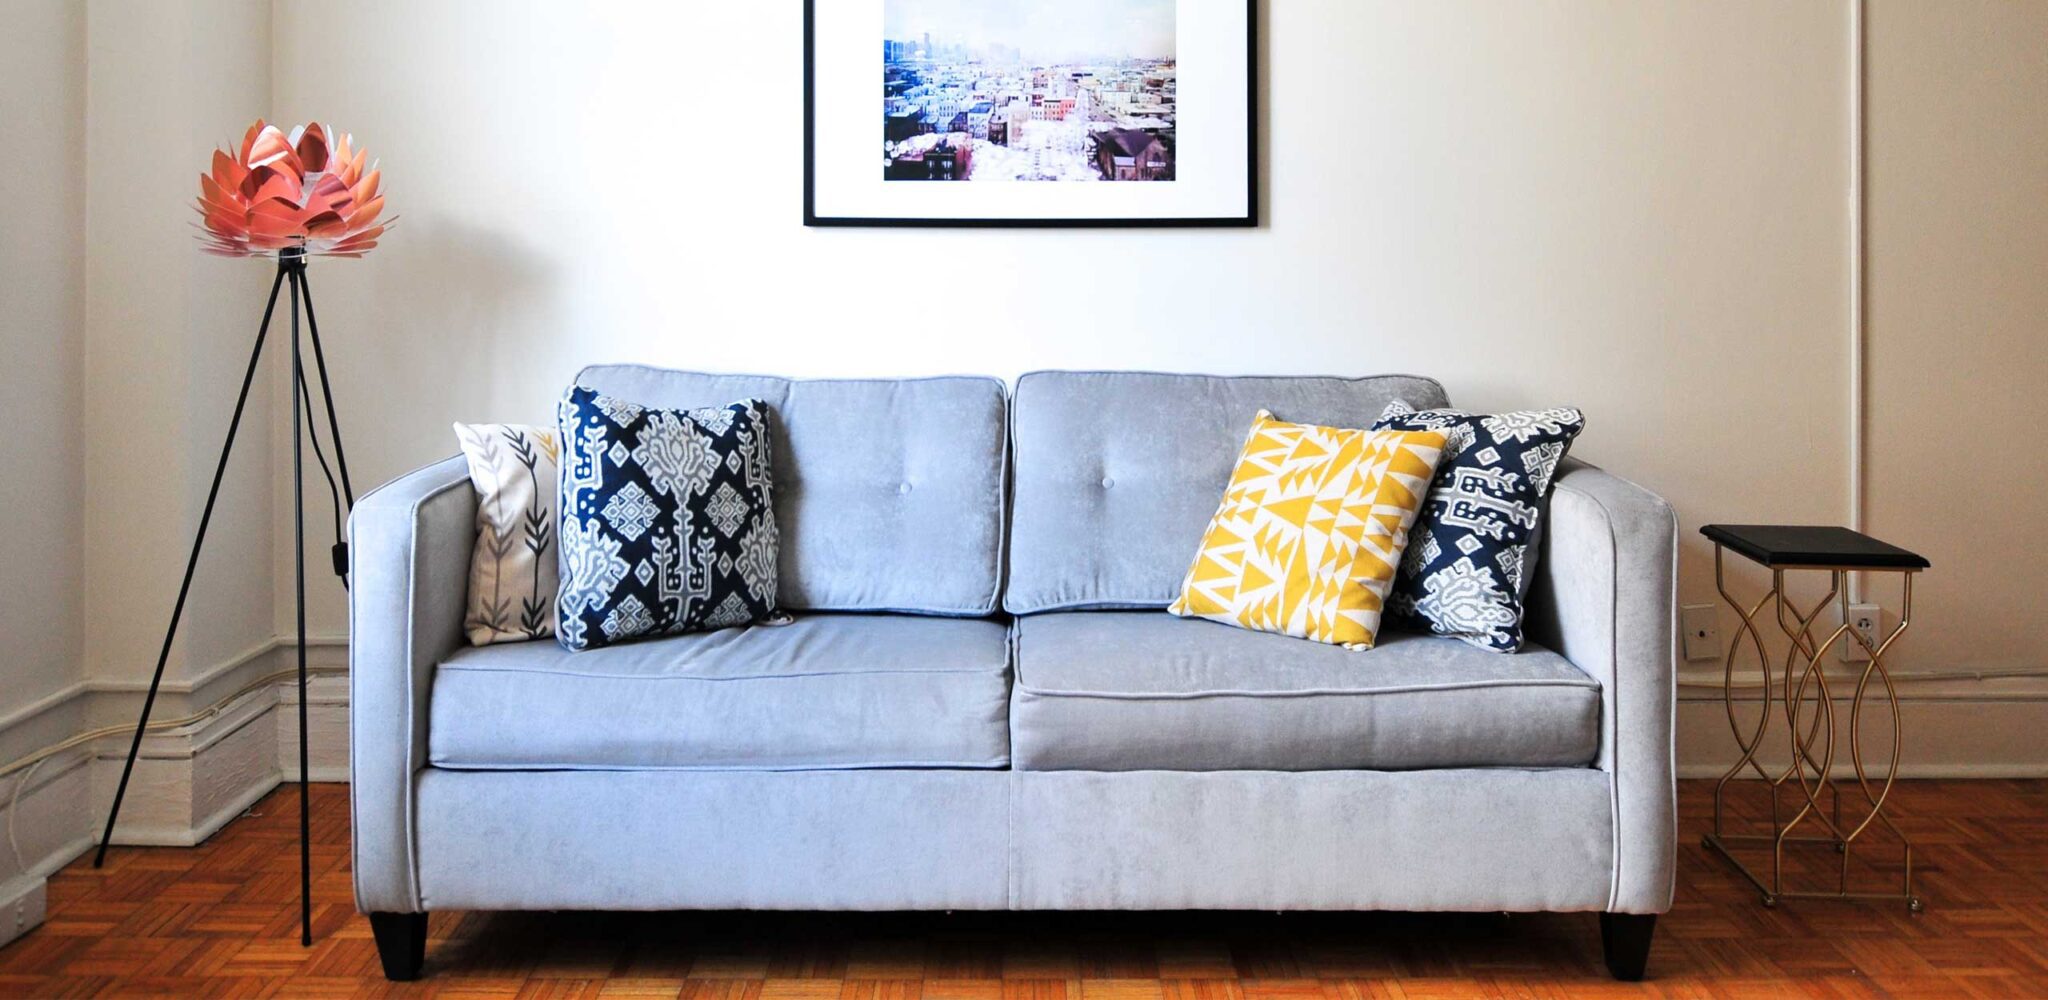 a gray sofa in a furnished apartment